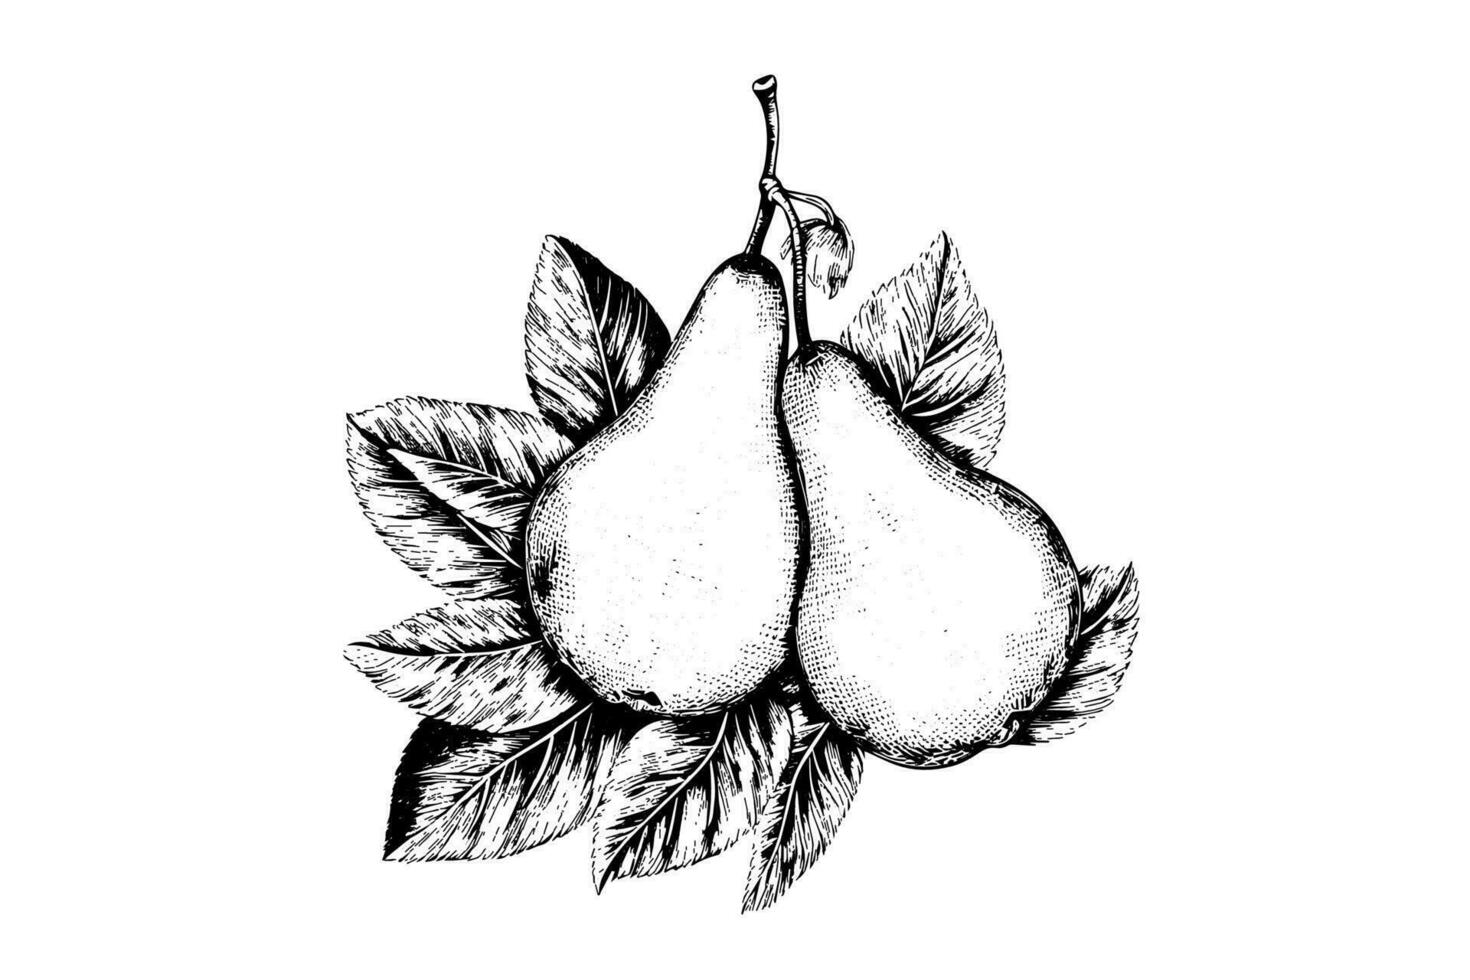 Set of pears. Ink sketch isolated on white background. Hand drawn vector illustration.